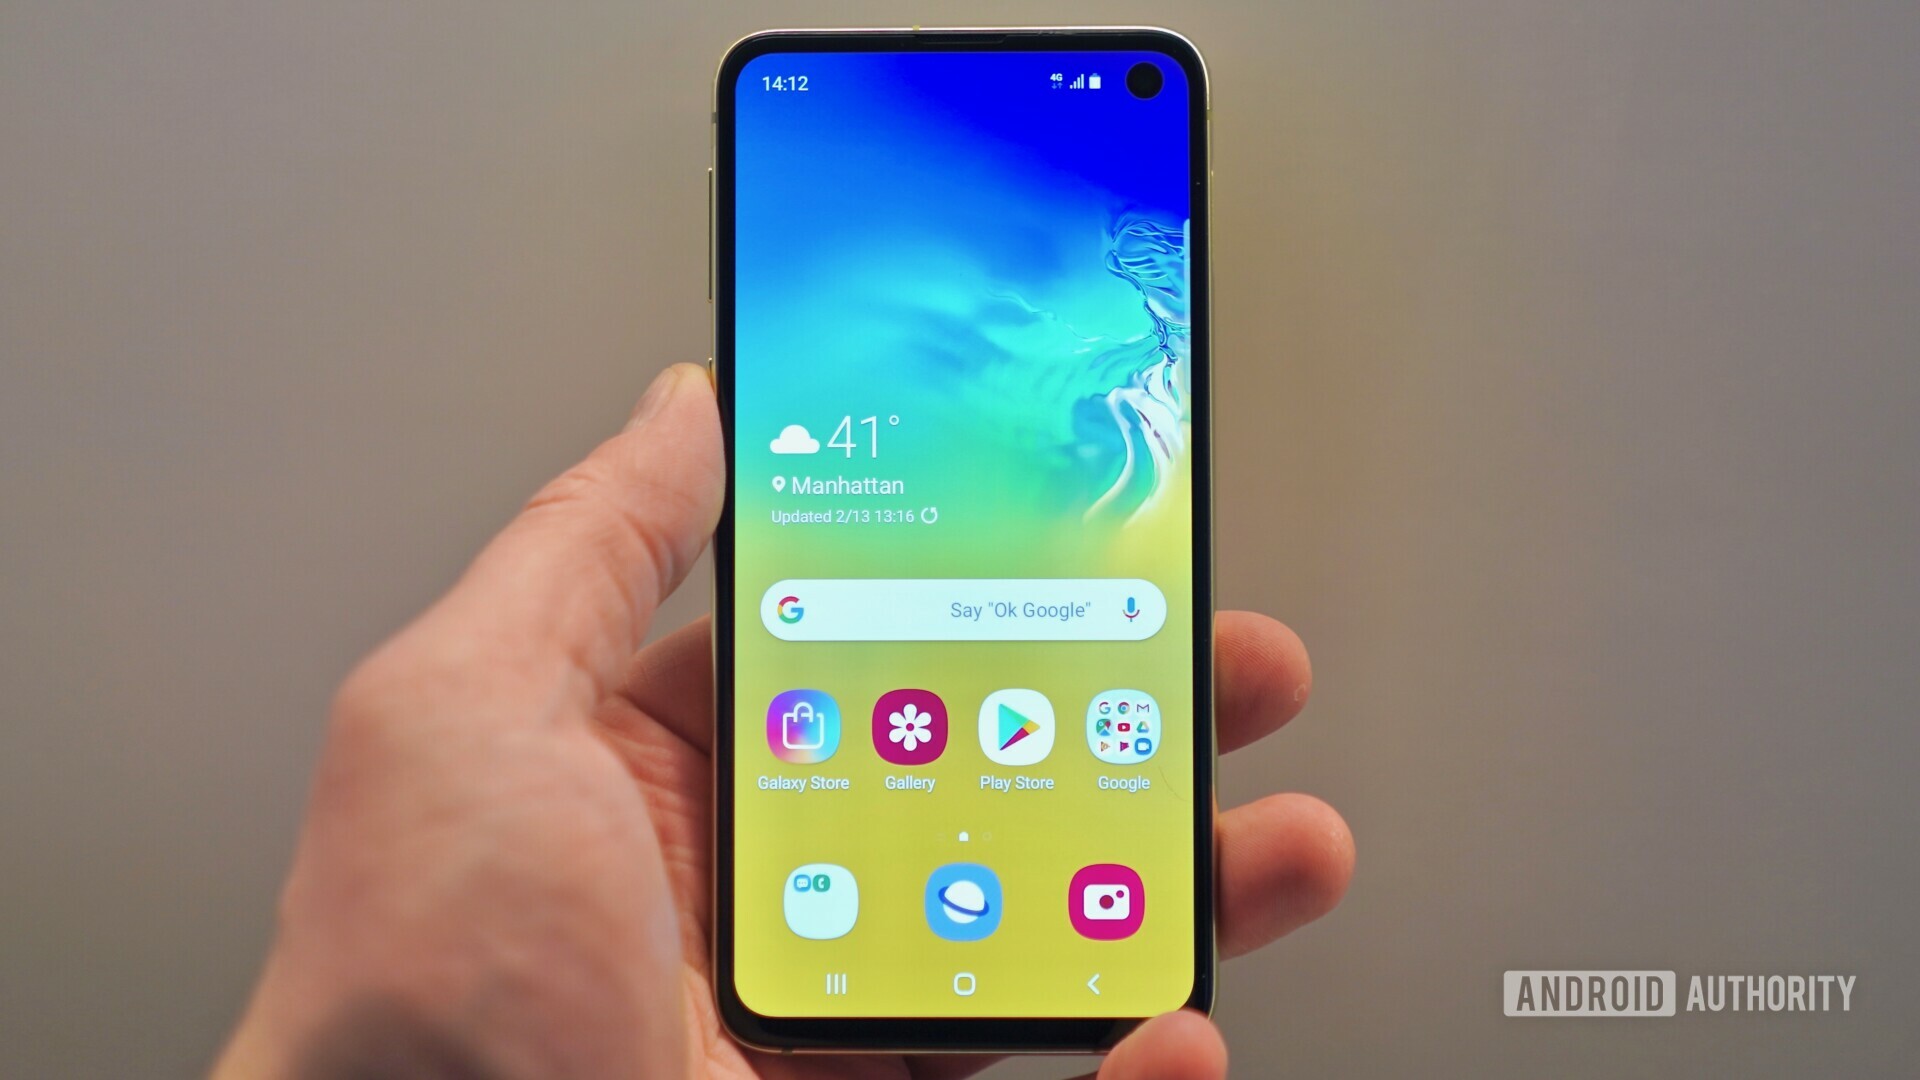 Photo of the new Samsung Galaxy S10e in a hand with screen turned on.